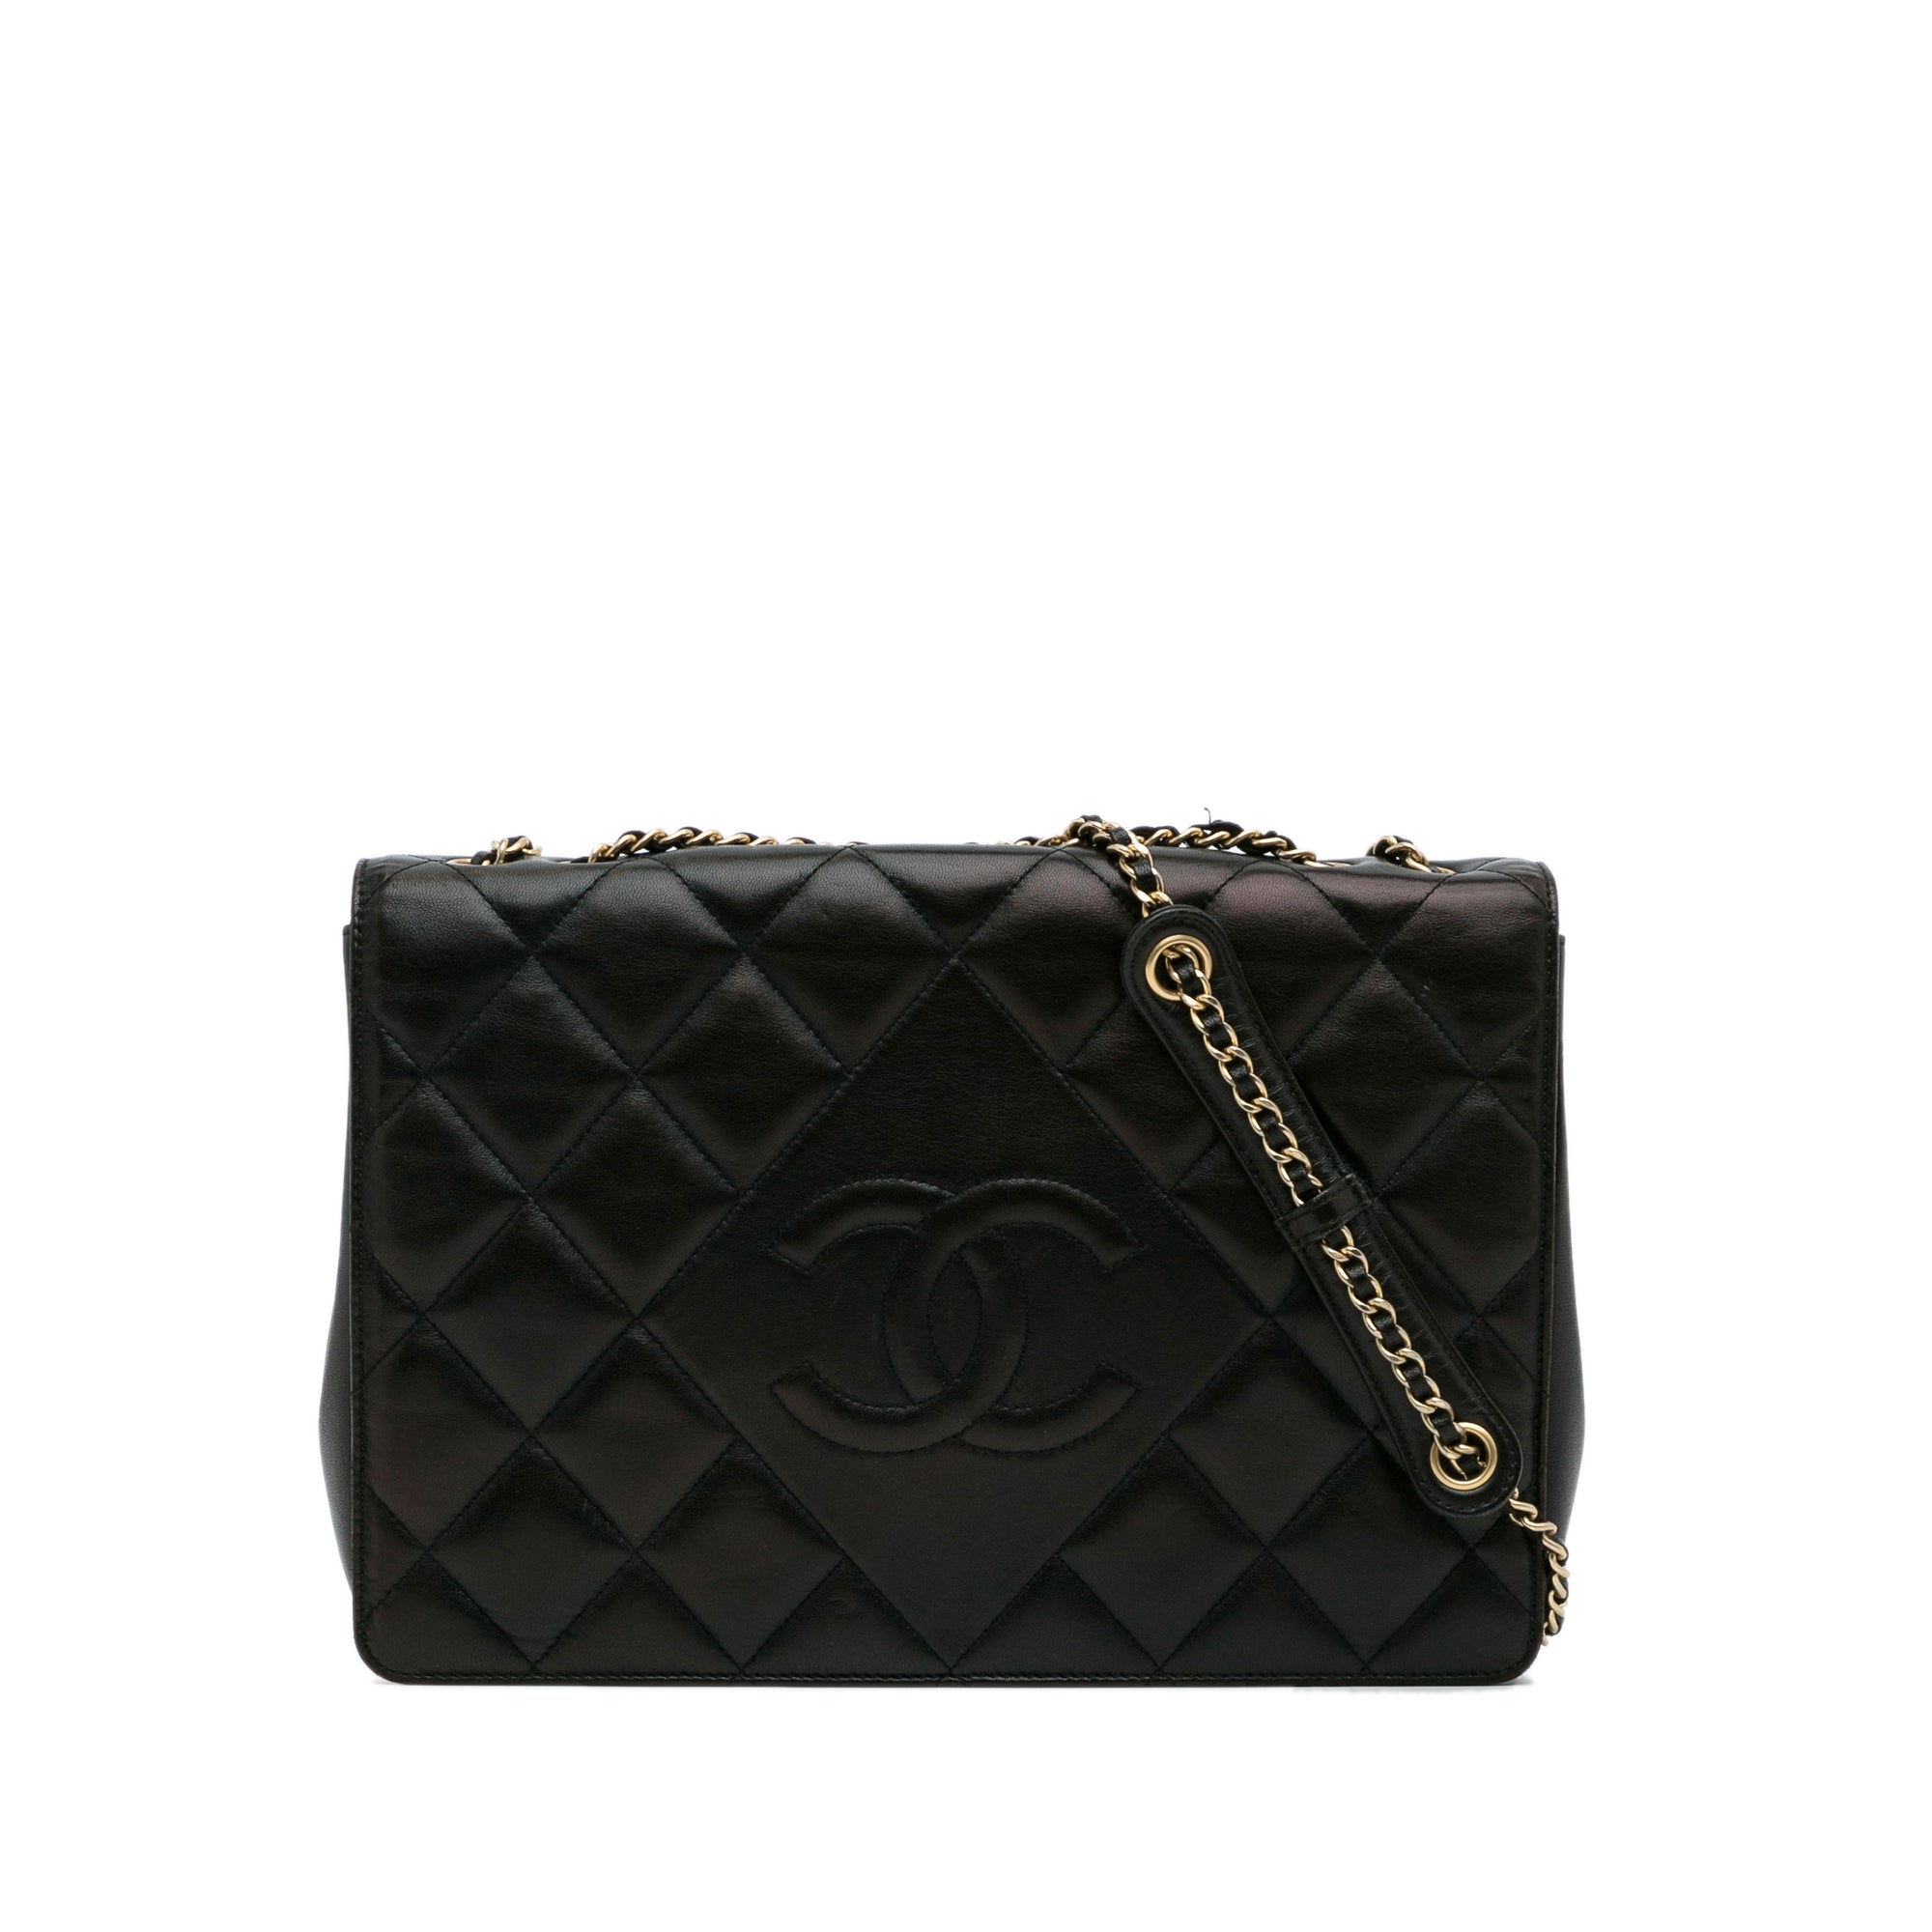 CHANEL Chanel CC Quilted Flap Bag Black - Vault 55